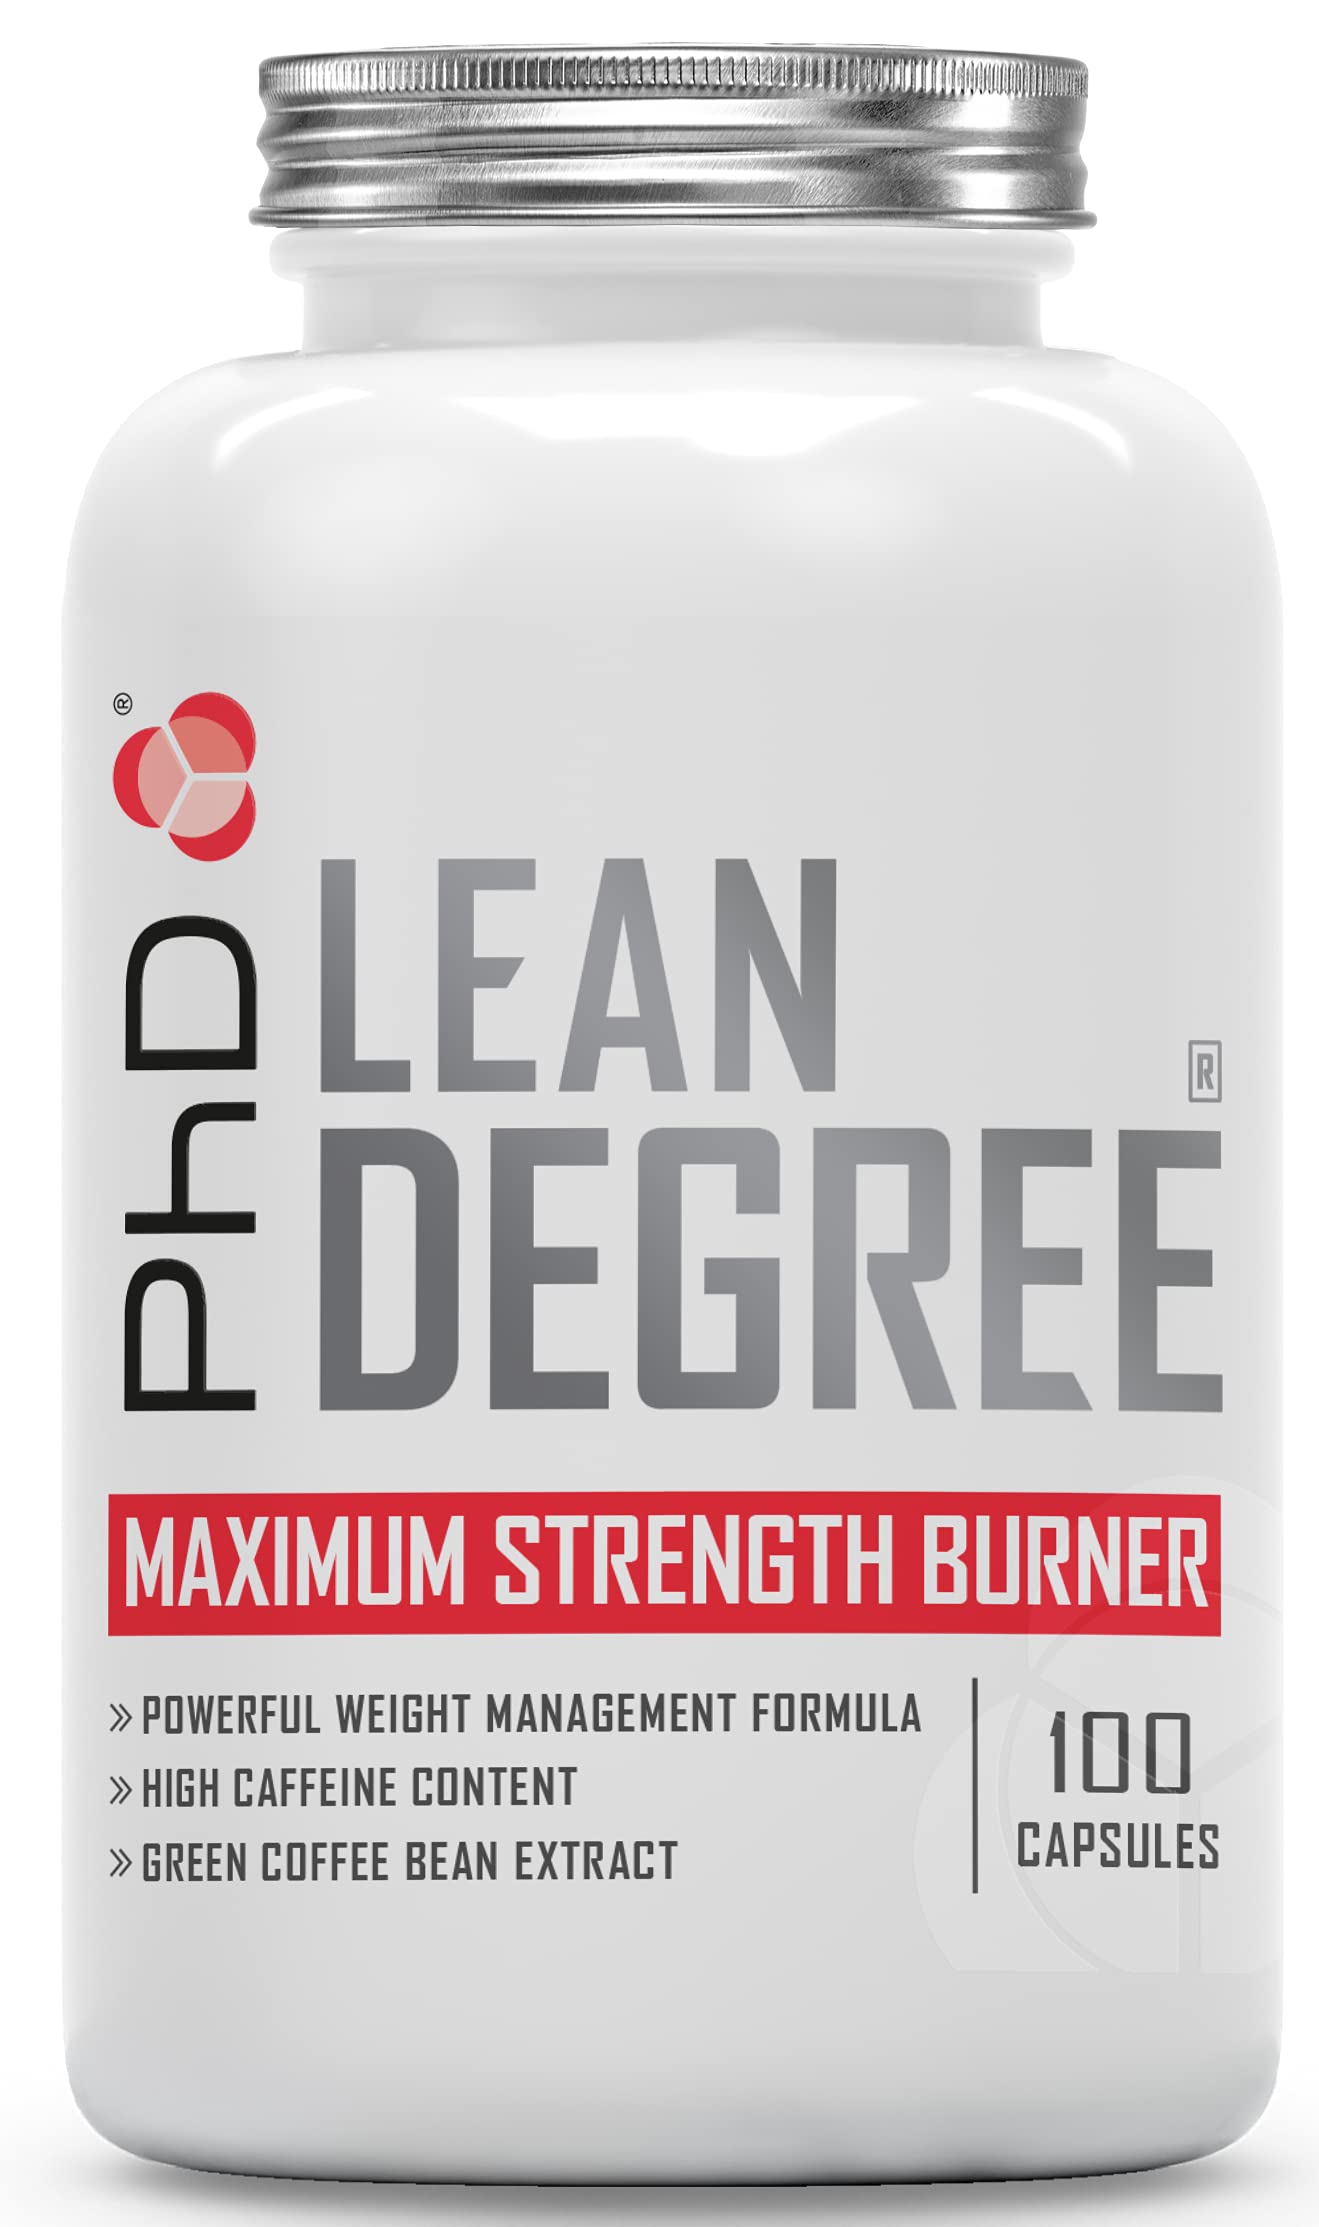 PhD Nutrition Lean Degree Maximum Strength Weight Management Supplement | High Caffeine | Green Coffee Bean Extract | Powerful Burner | 100 Capsules (25 Days Supply)